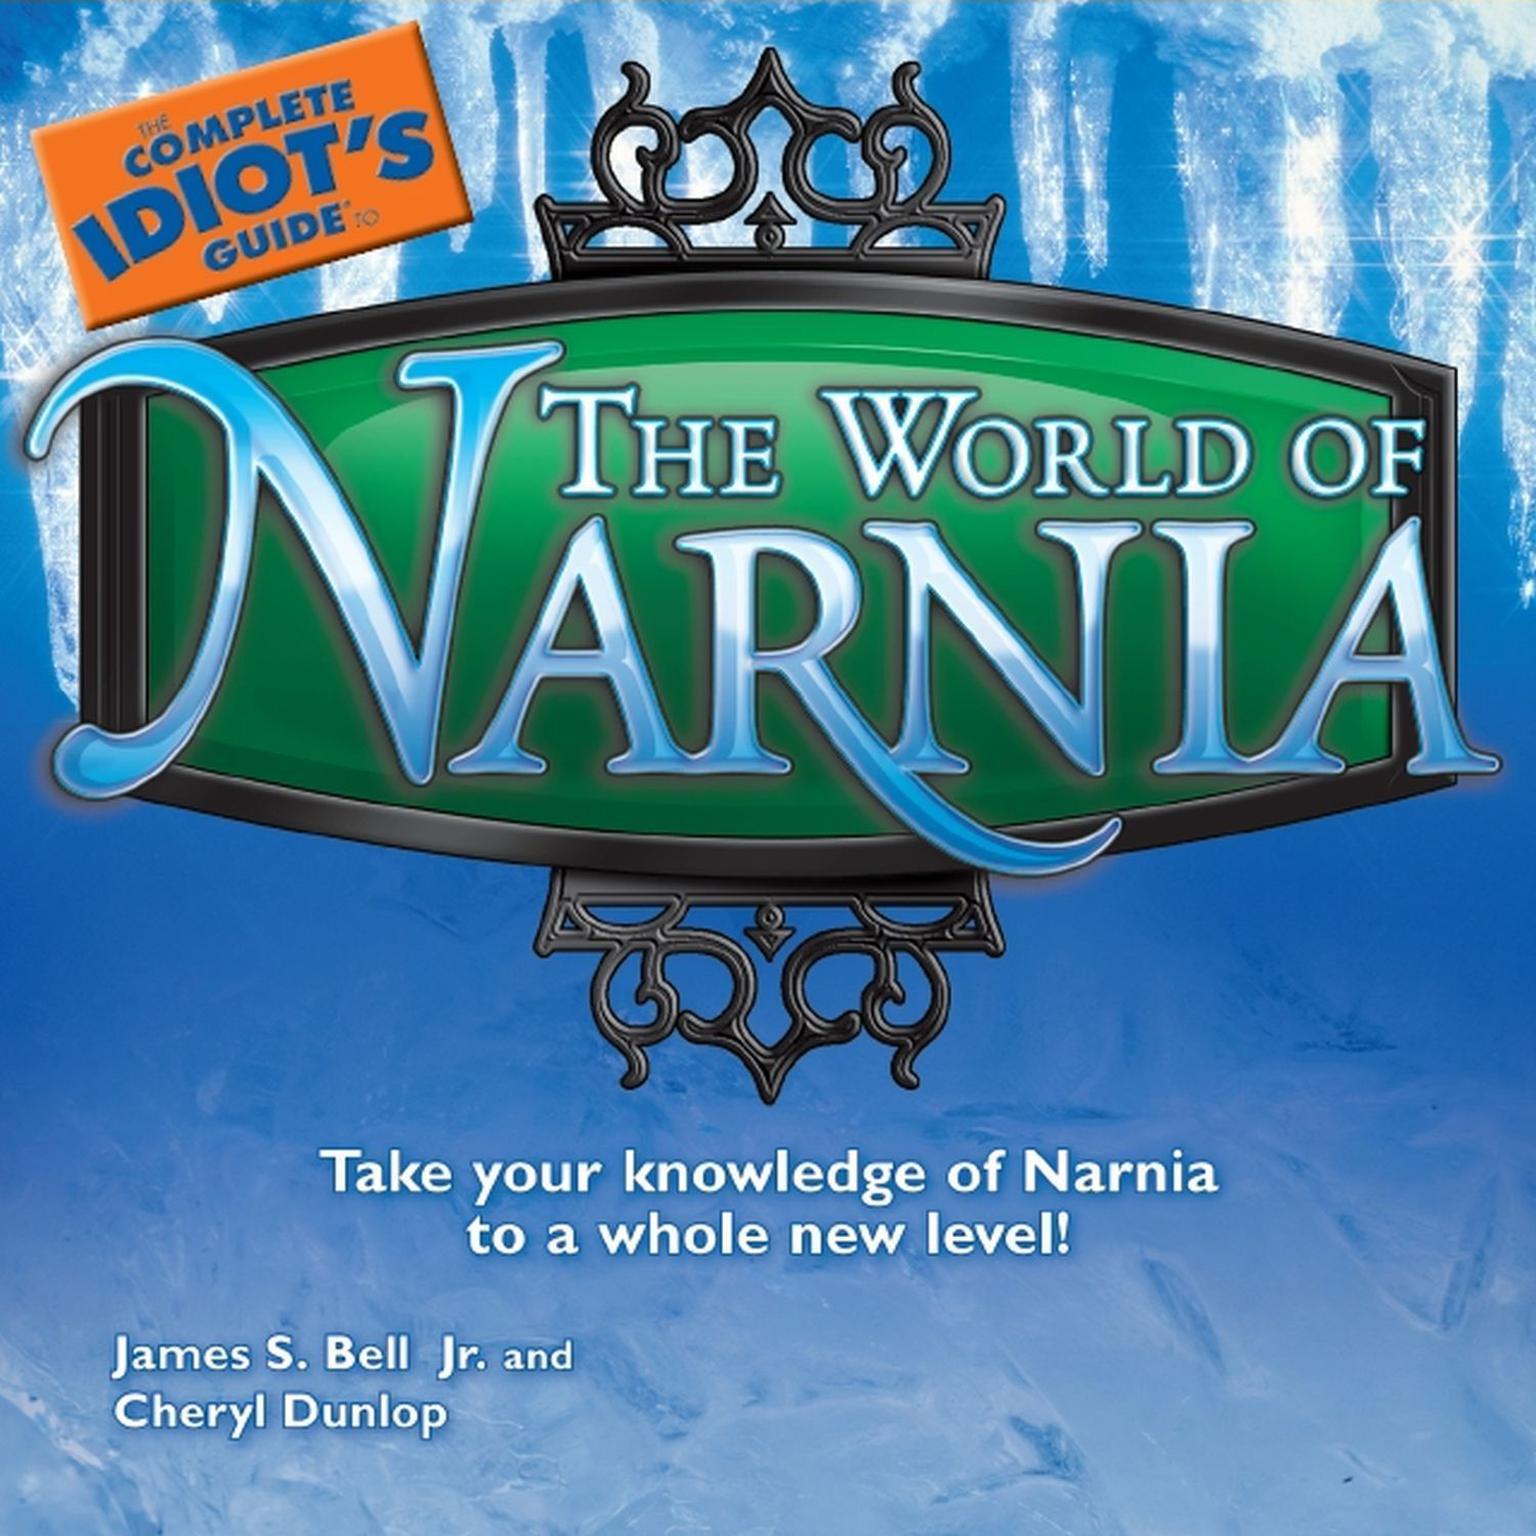 The Complete Idiot’s Guide to the World of Narnia (Abridged) Audiobook, by James S. Bell